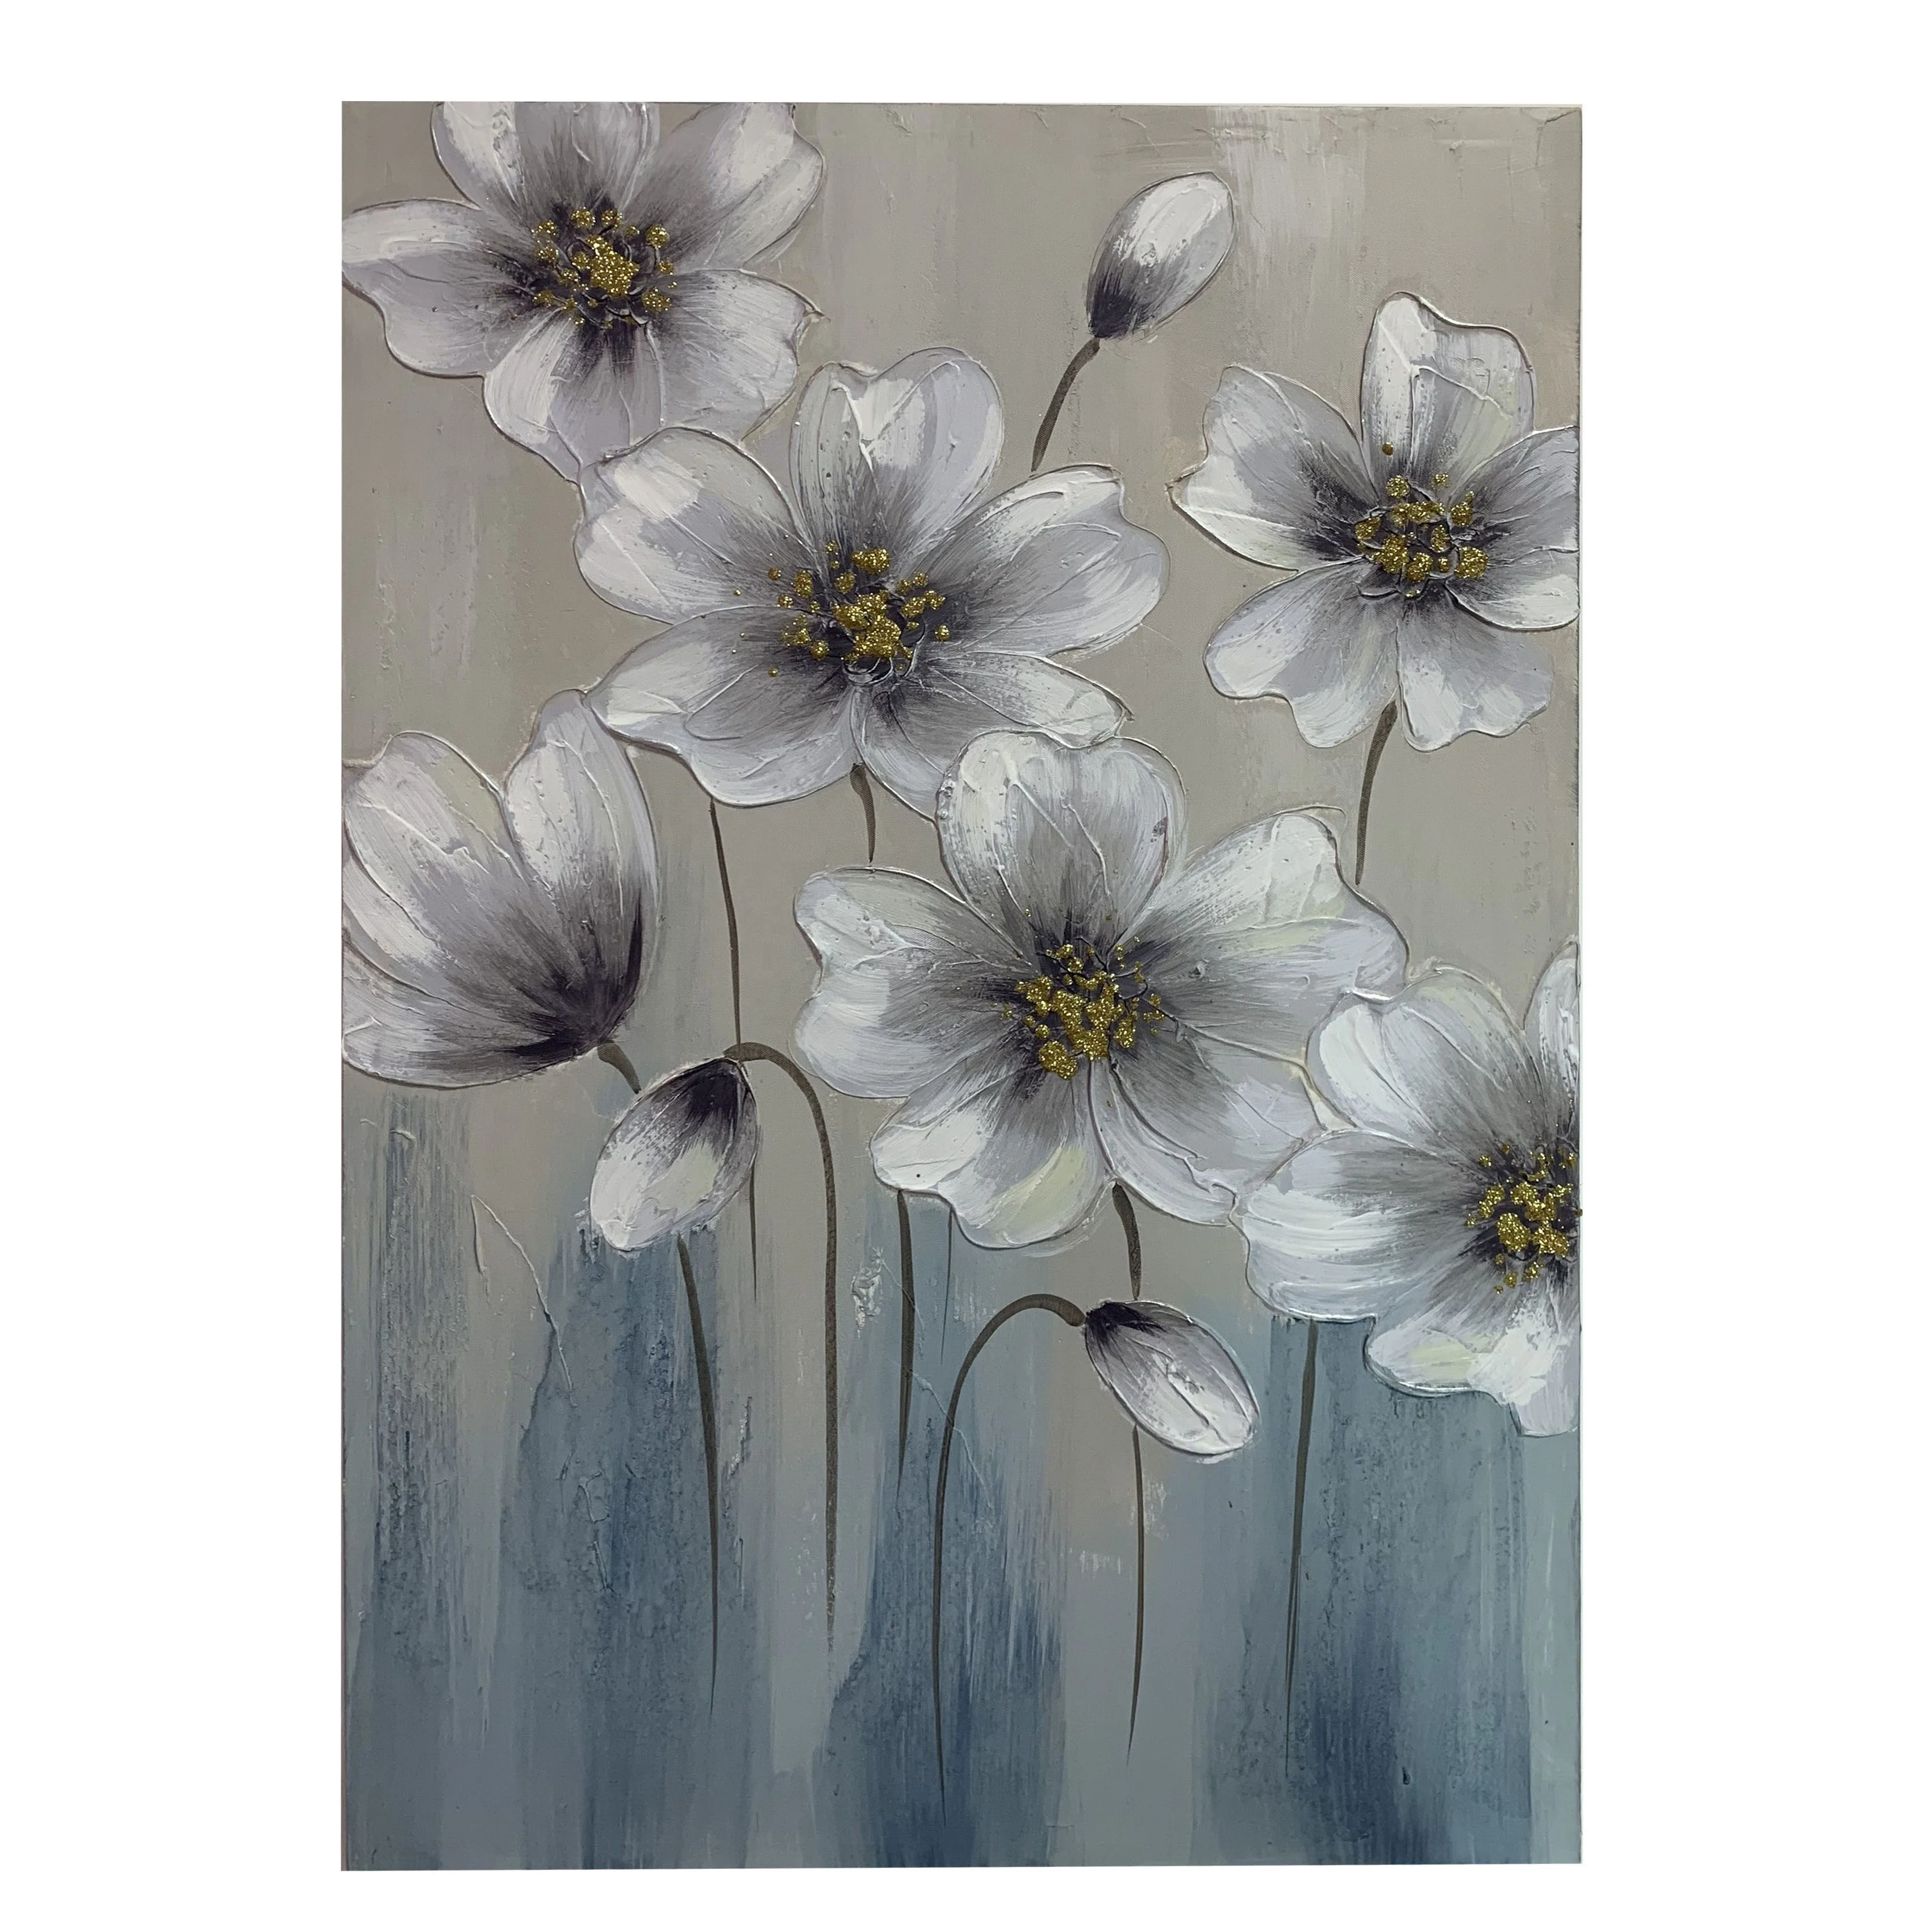 Modern White Flower Canvas Painting Set 2 Wall Art For Living Room - Buy Decoration Sunburst Wall Art,Wall Art For Restaurant,Modern Textured Wall Art Product On Alibaba.com